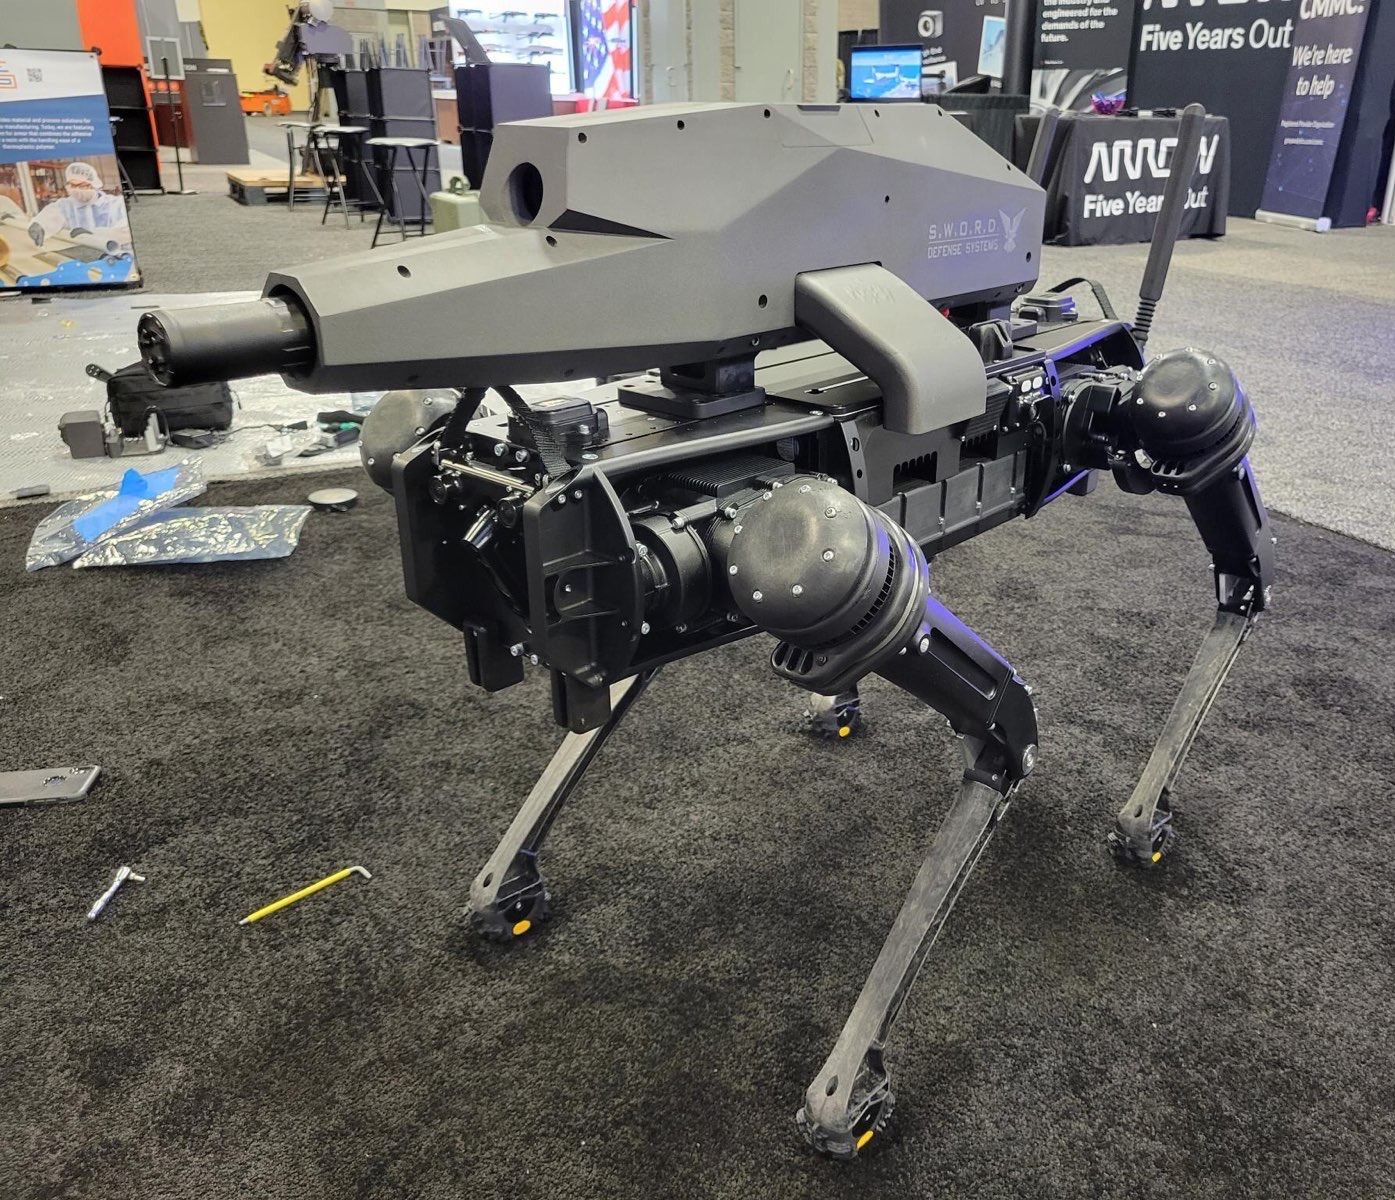 Spot Robot Dog for Sale | How to Buy Boston Dynamics Robot